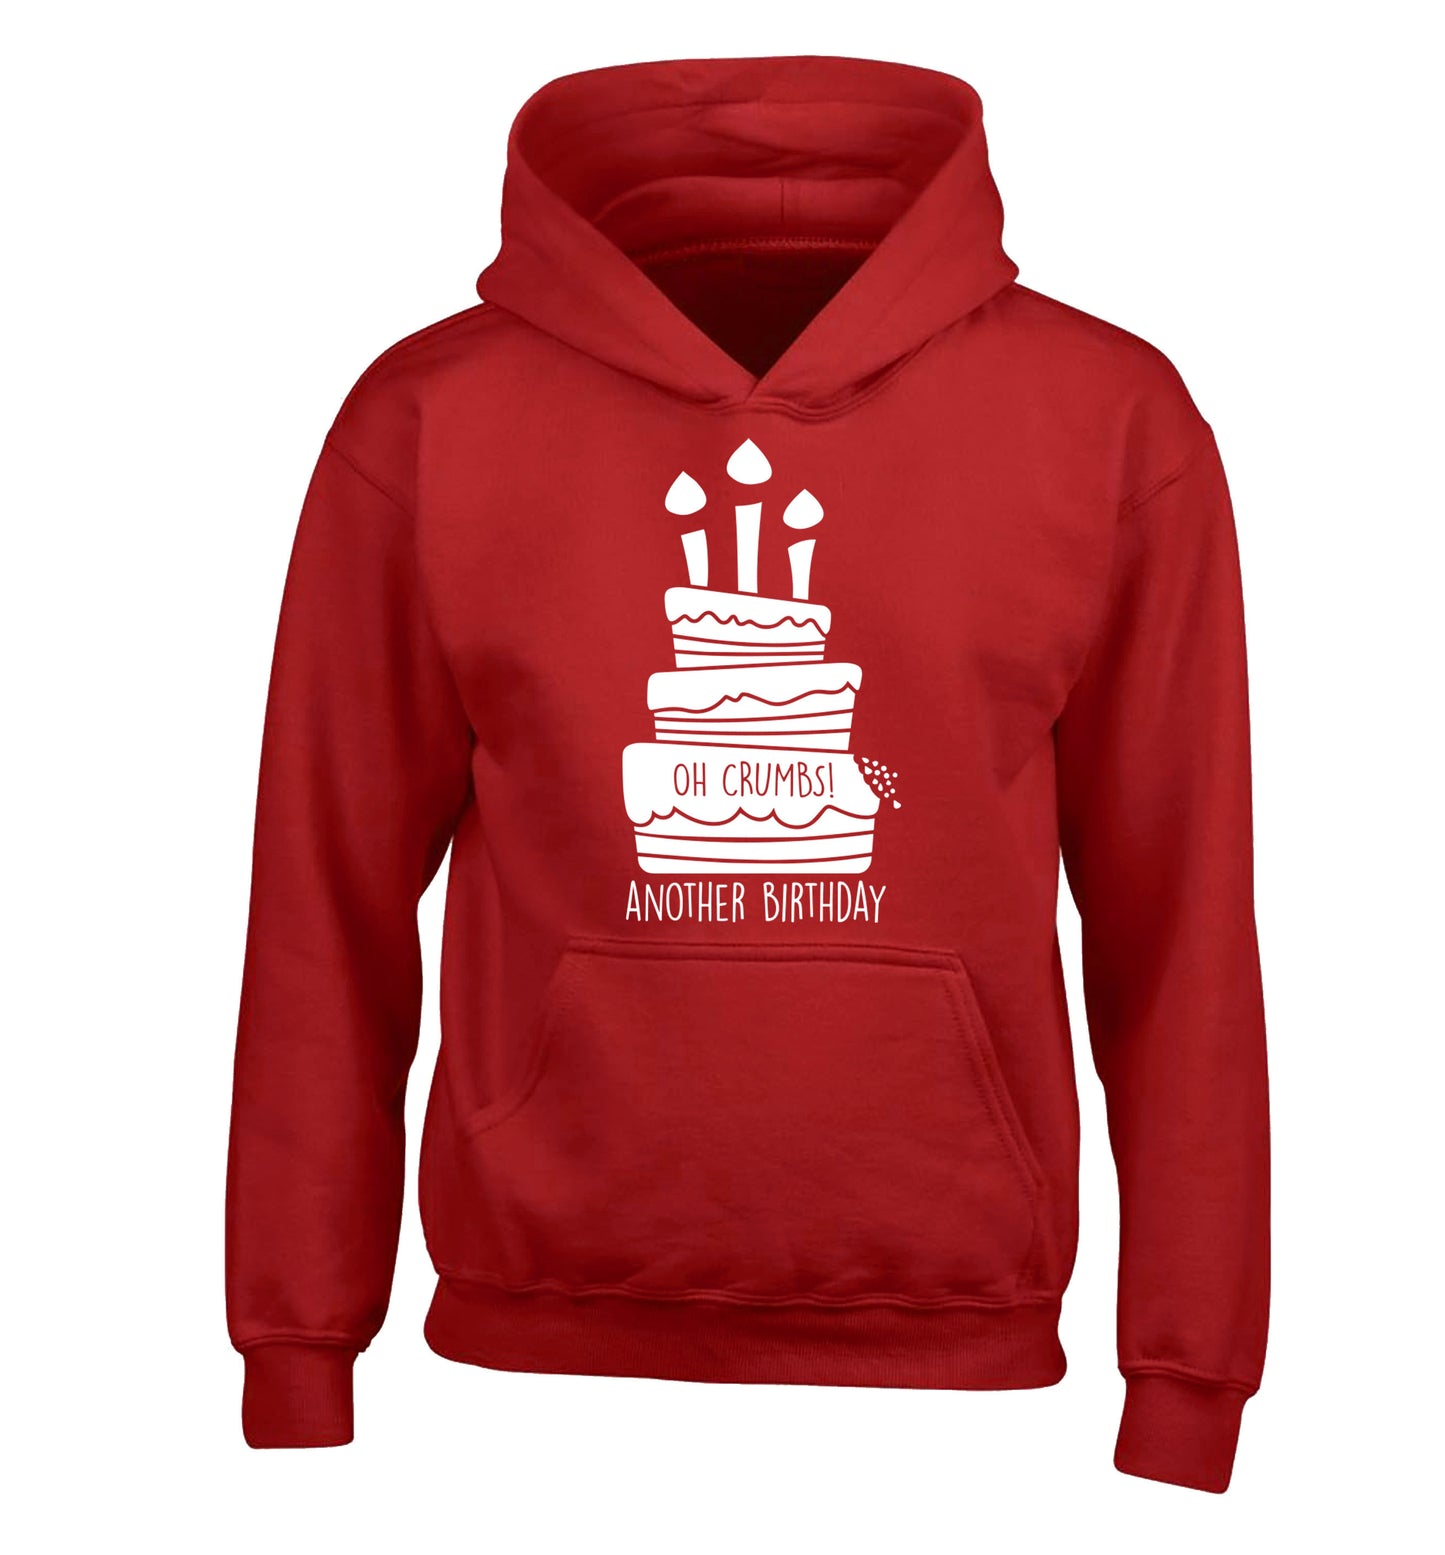 Oh crumbs another birthday! children's red hoodie 12-14 Years